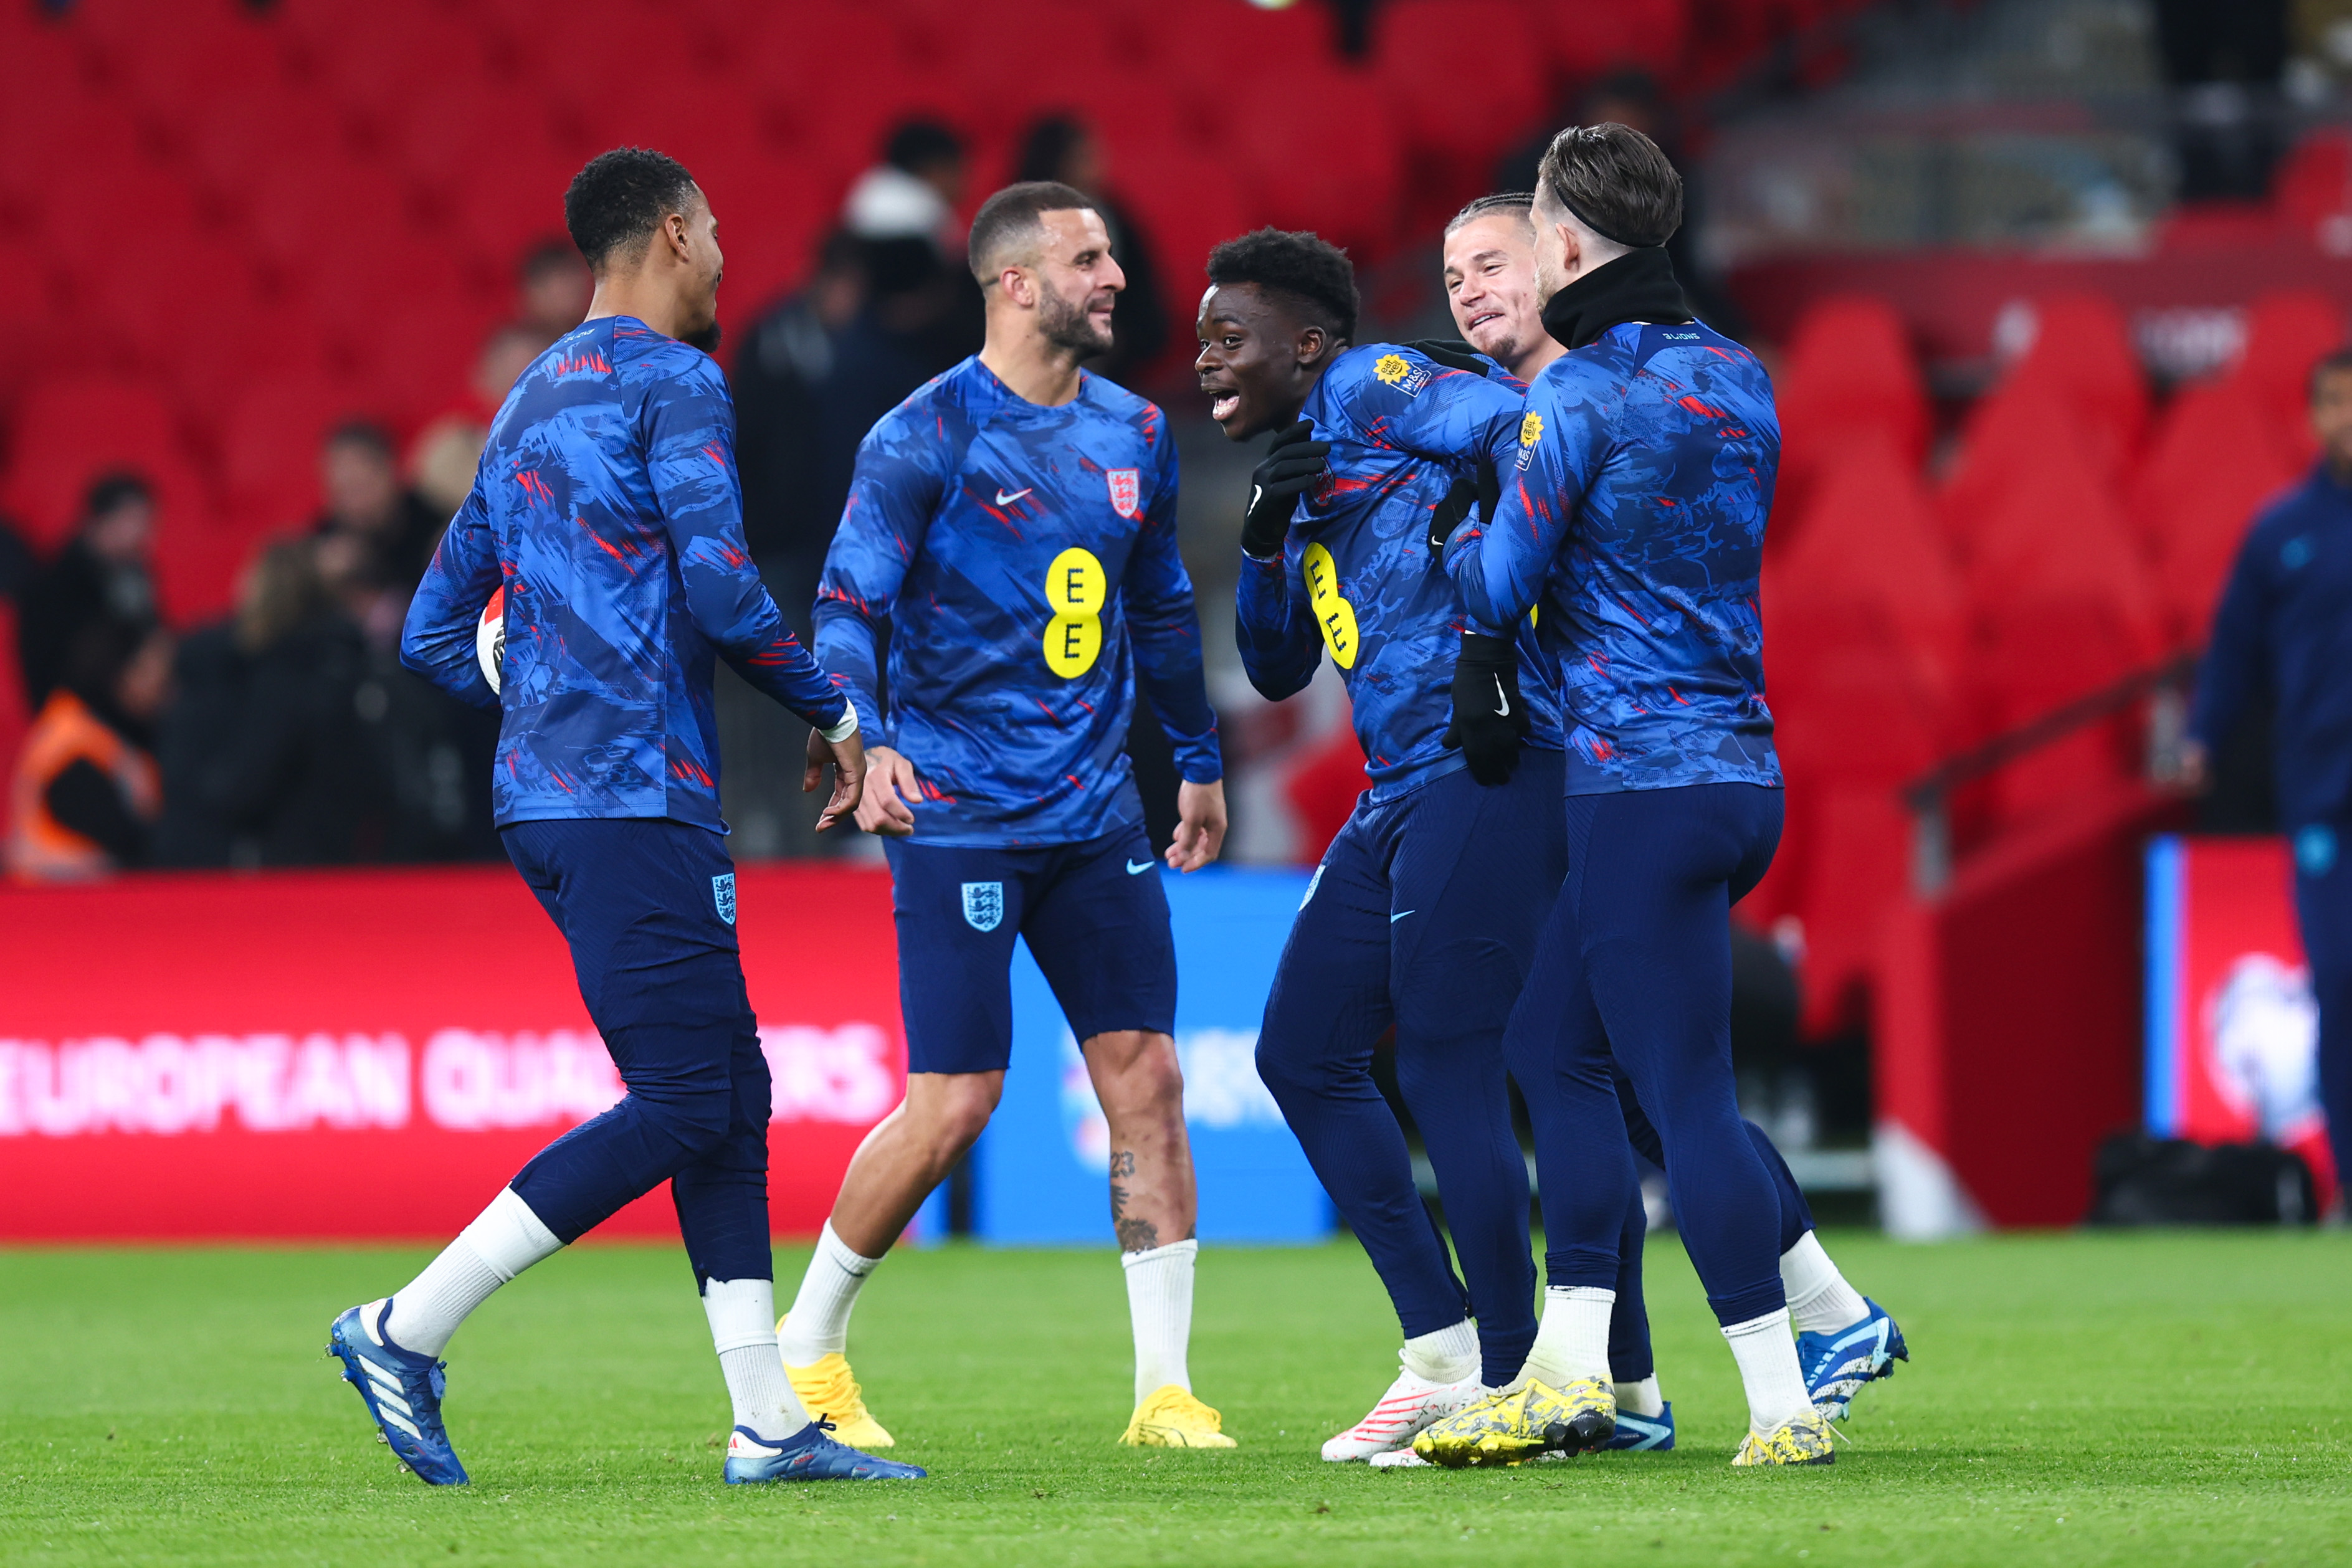 Player Ratings: England 2-0 Malta - Saka grabs an assist while VAR rules out Rice's superb strike 